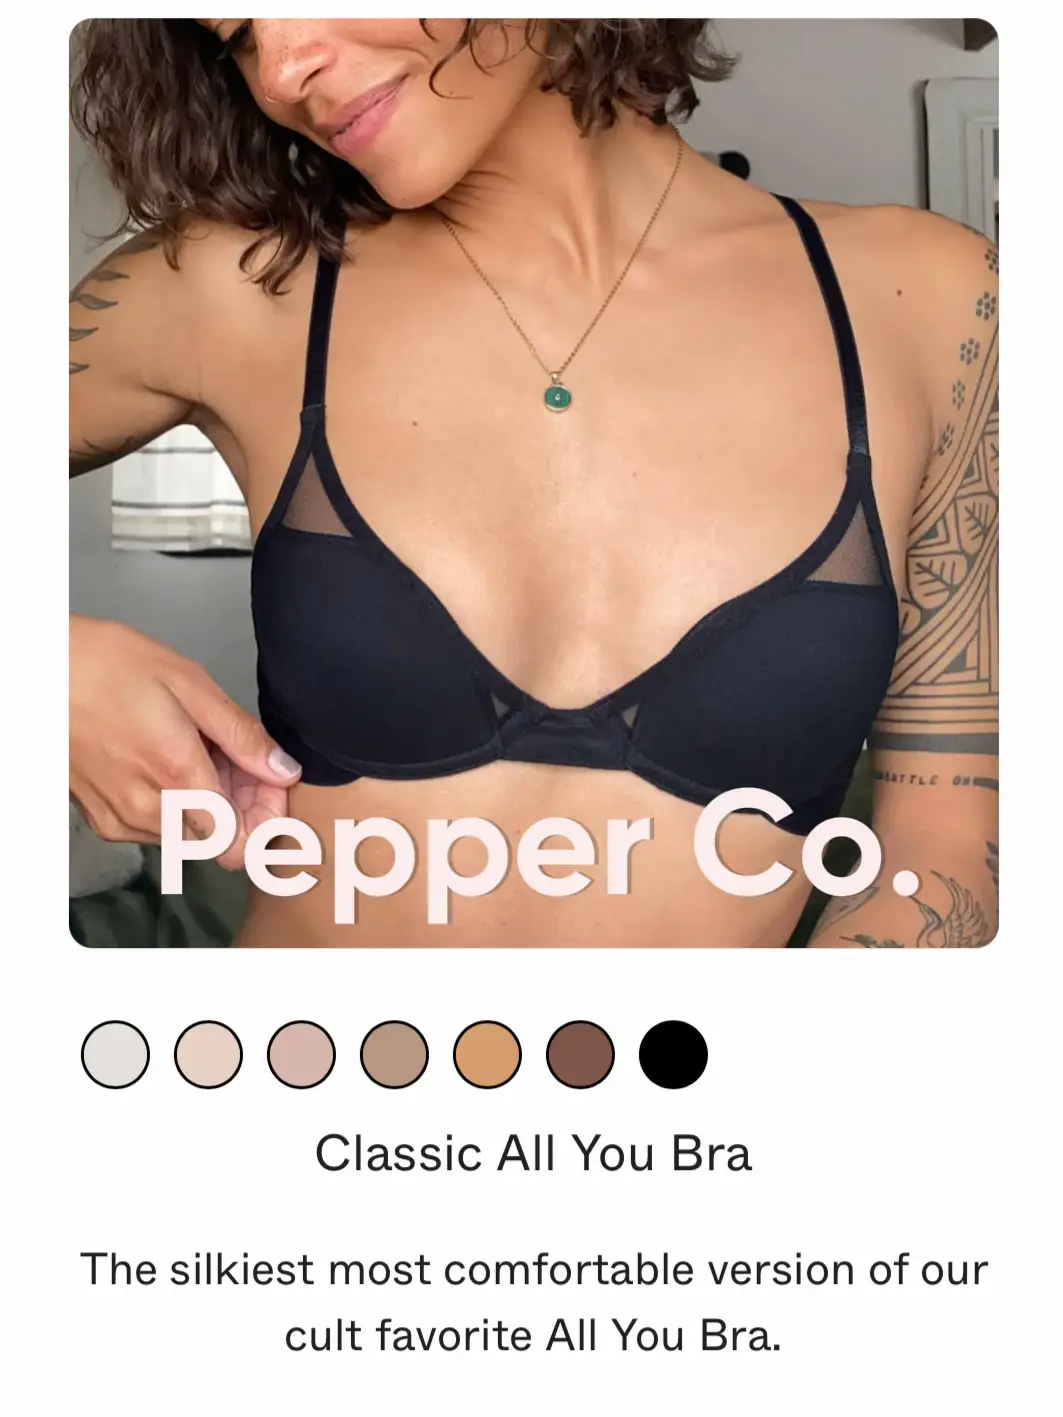 I have 32E boobs and found the best tops you can wear without a bra - my  mind was blown